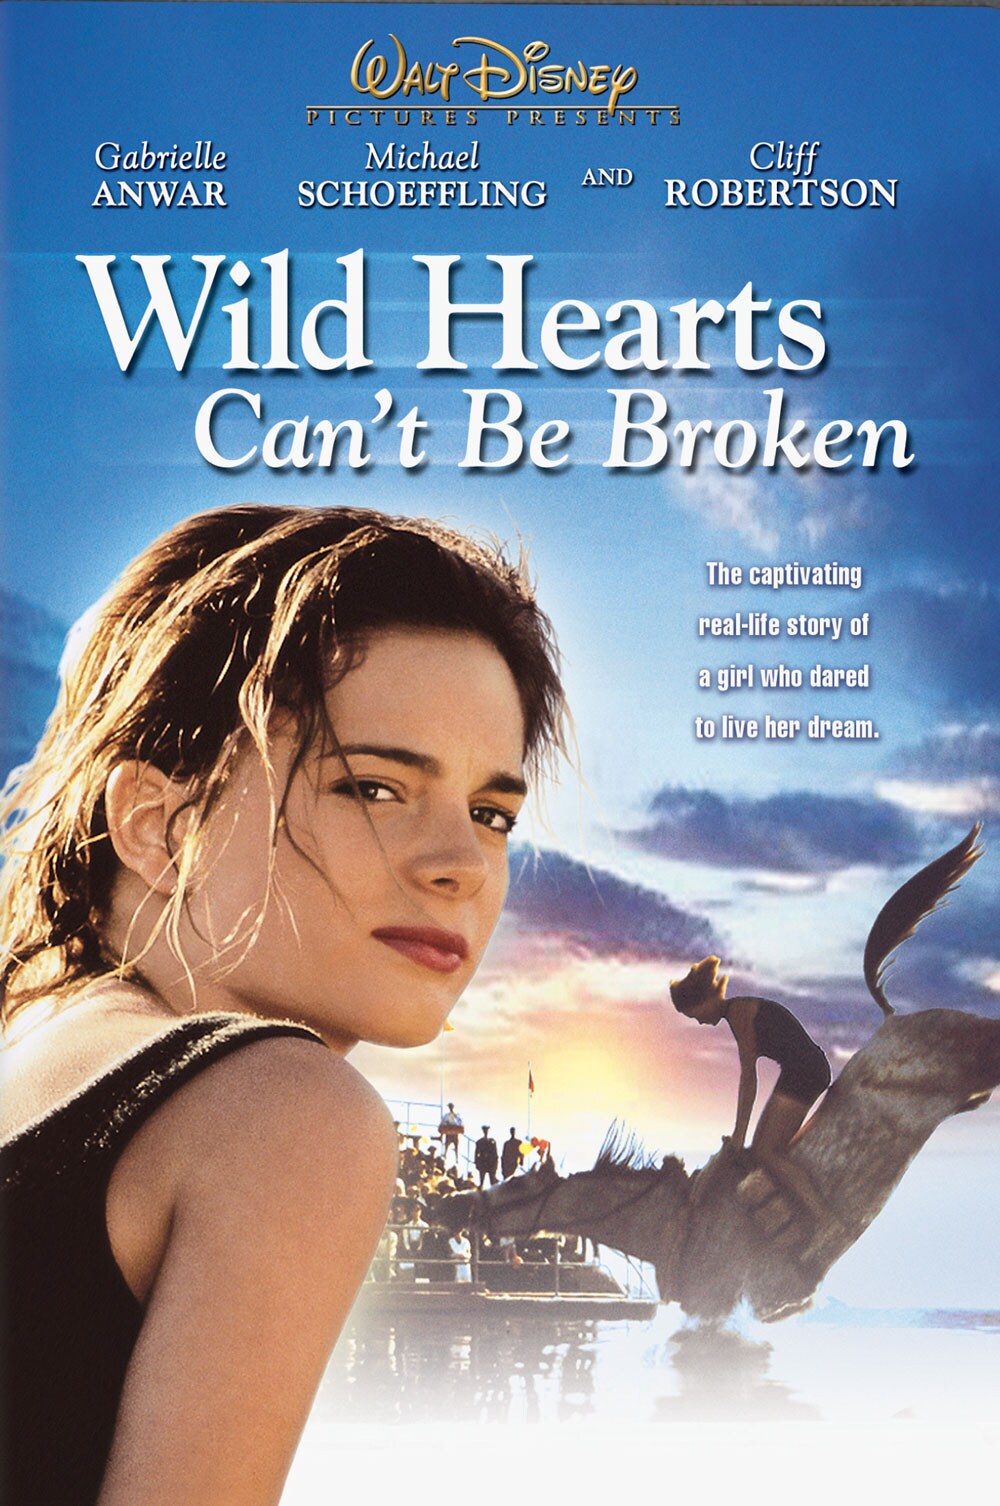 Wild Hearts Cant Be Broken Trailer